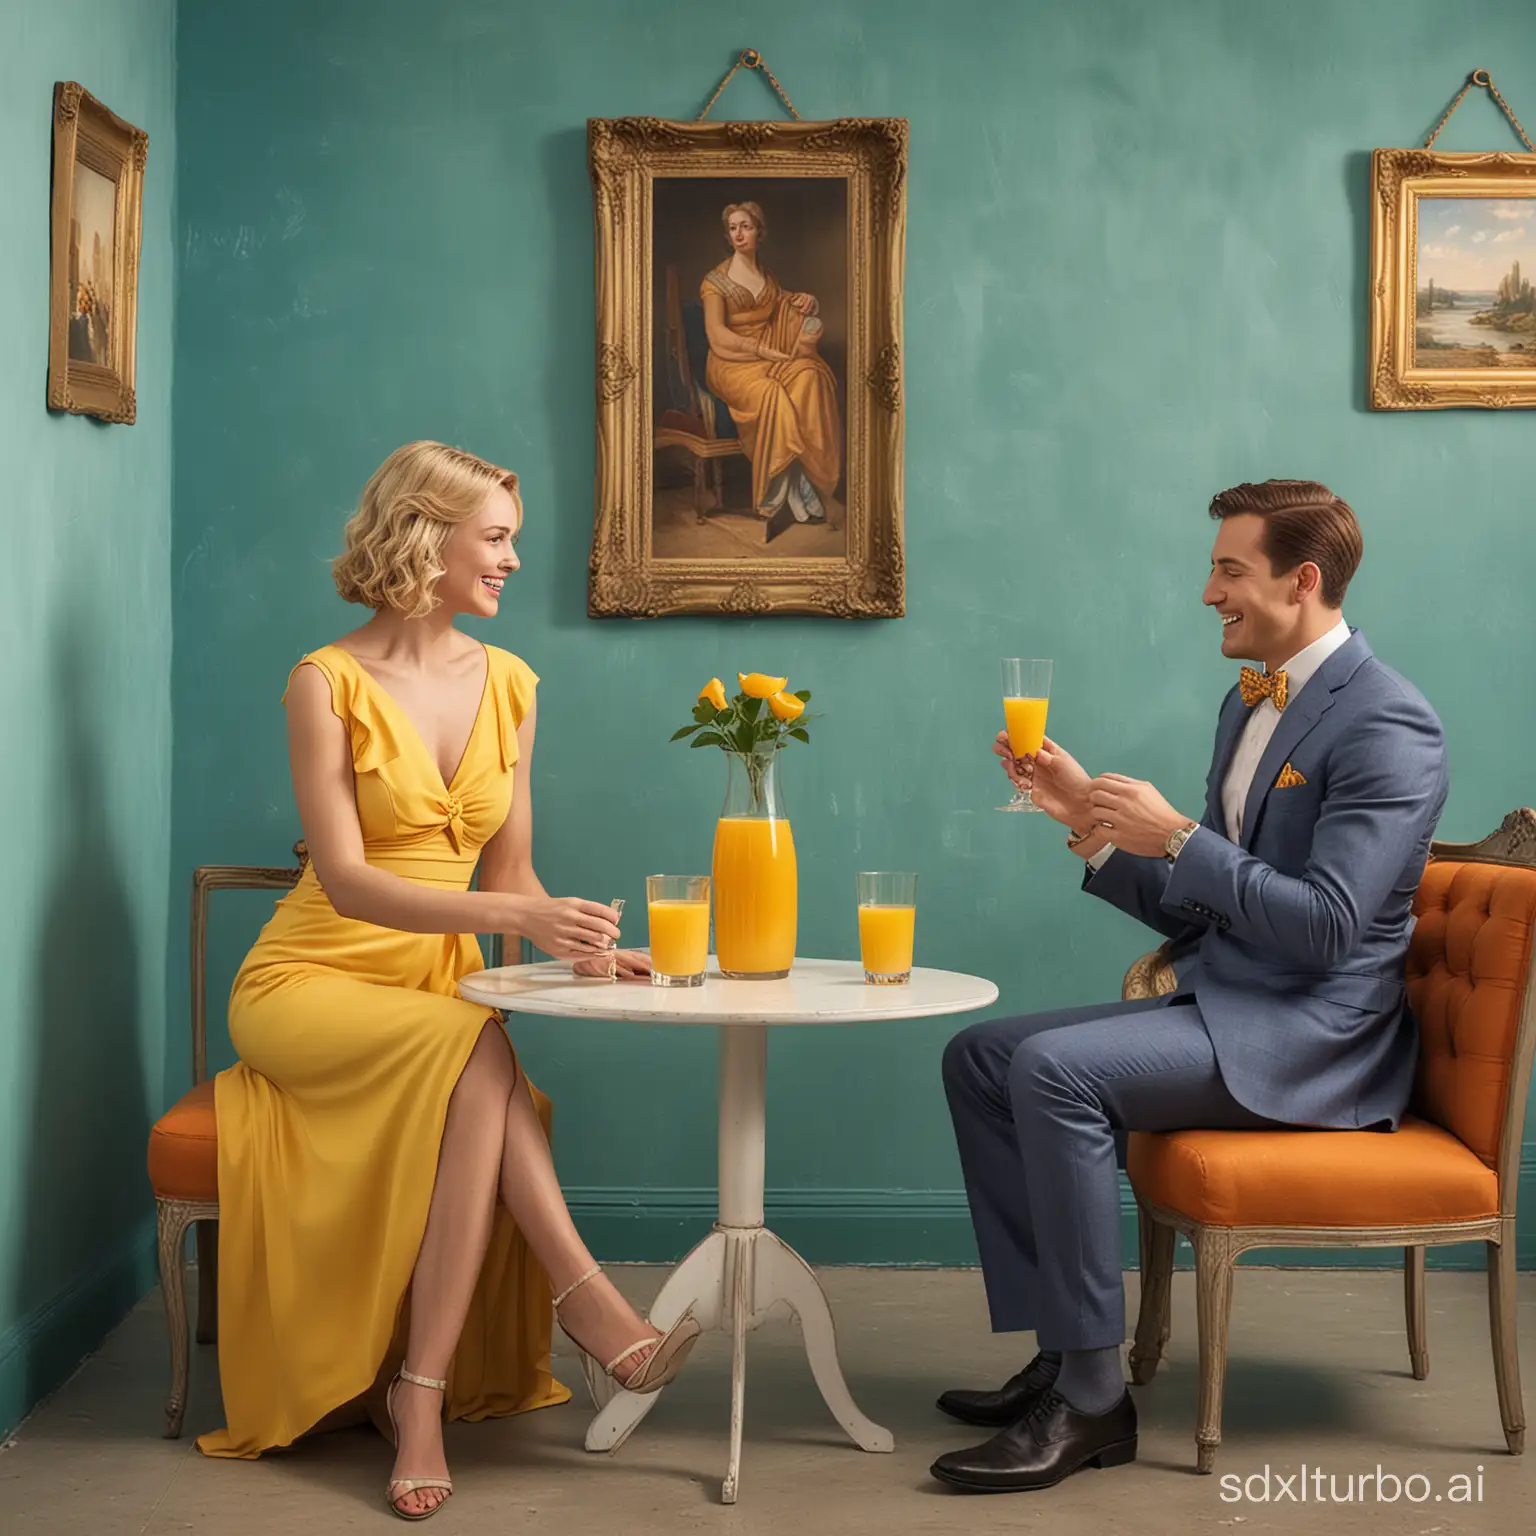 Create a 3D image of a man and a woman sitting on blue chairs with a small table between them. They are in the corner of a room. The man is on the left side of the image and the woman on the right. The man is wearing a blue suit with a bow tie, he has short brown hair and a glass of orange juice in hand. The blonde woman is sitting on the right, she is wearing a long yellow dress and holding a glass of orange juice. They are looking at each other and smiling. In the foreground, there is a glass table with the orange juice carafe. They are in the corner of the room with blue/green walls, and a painting on the left wall. The left wall also has a curtain.